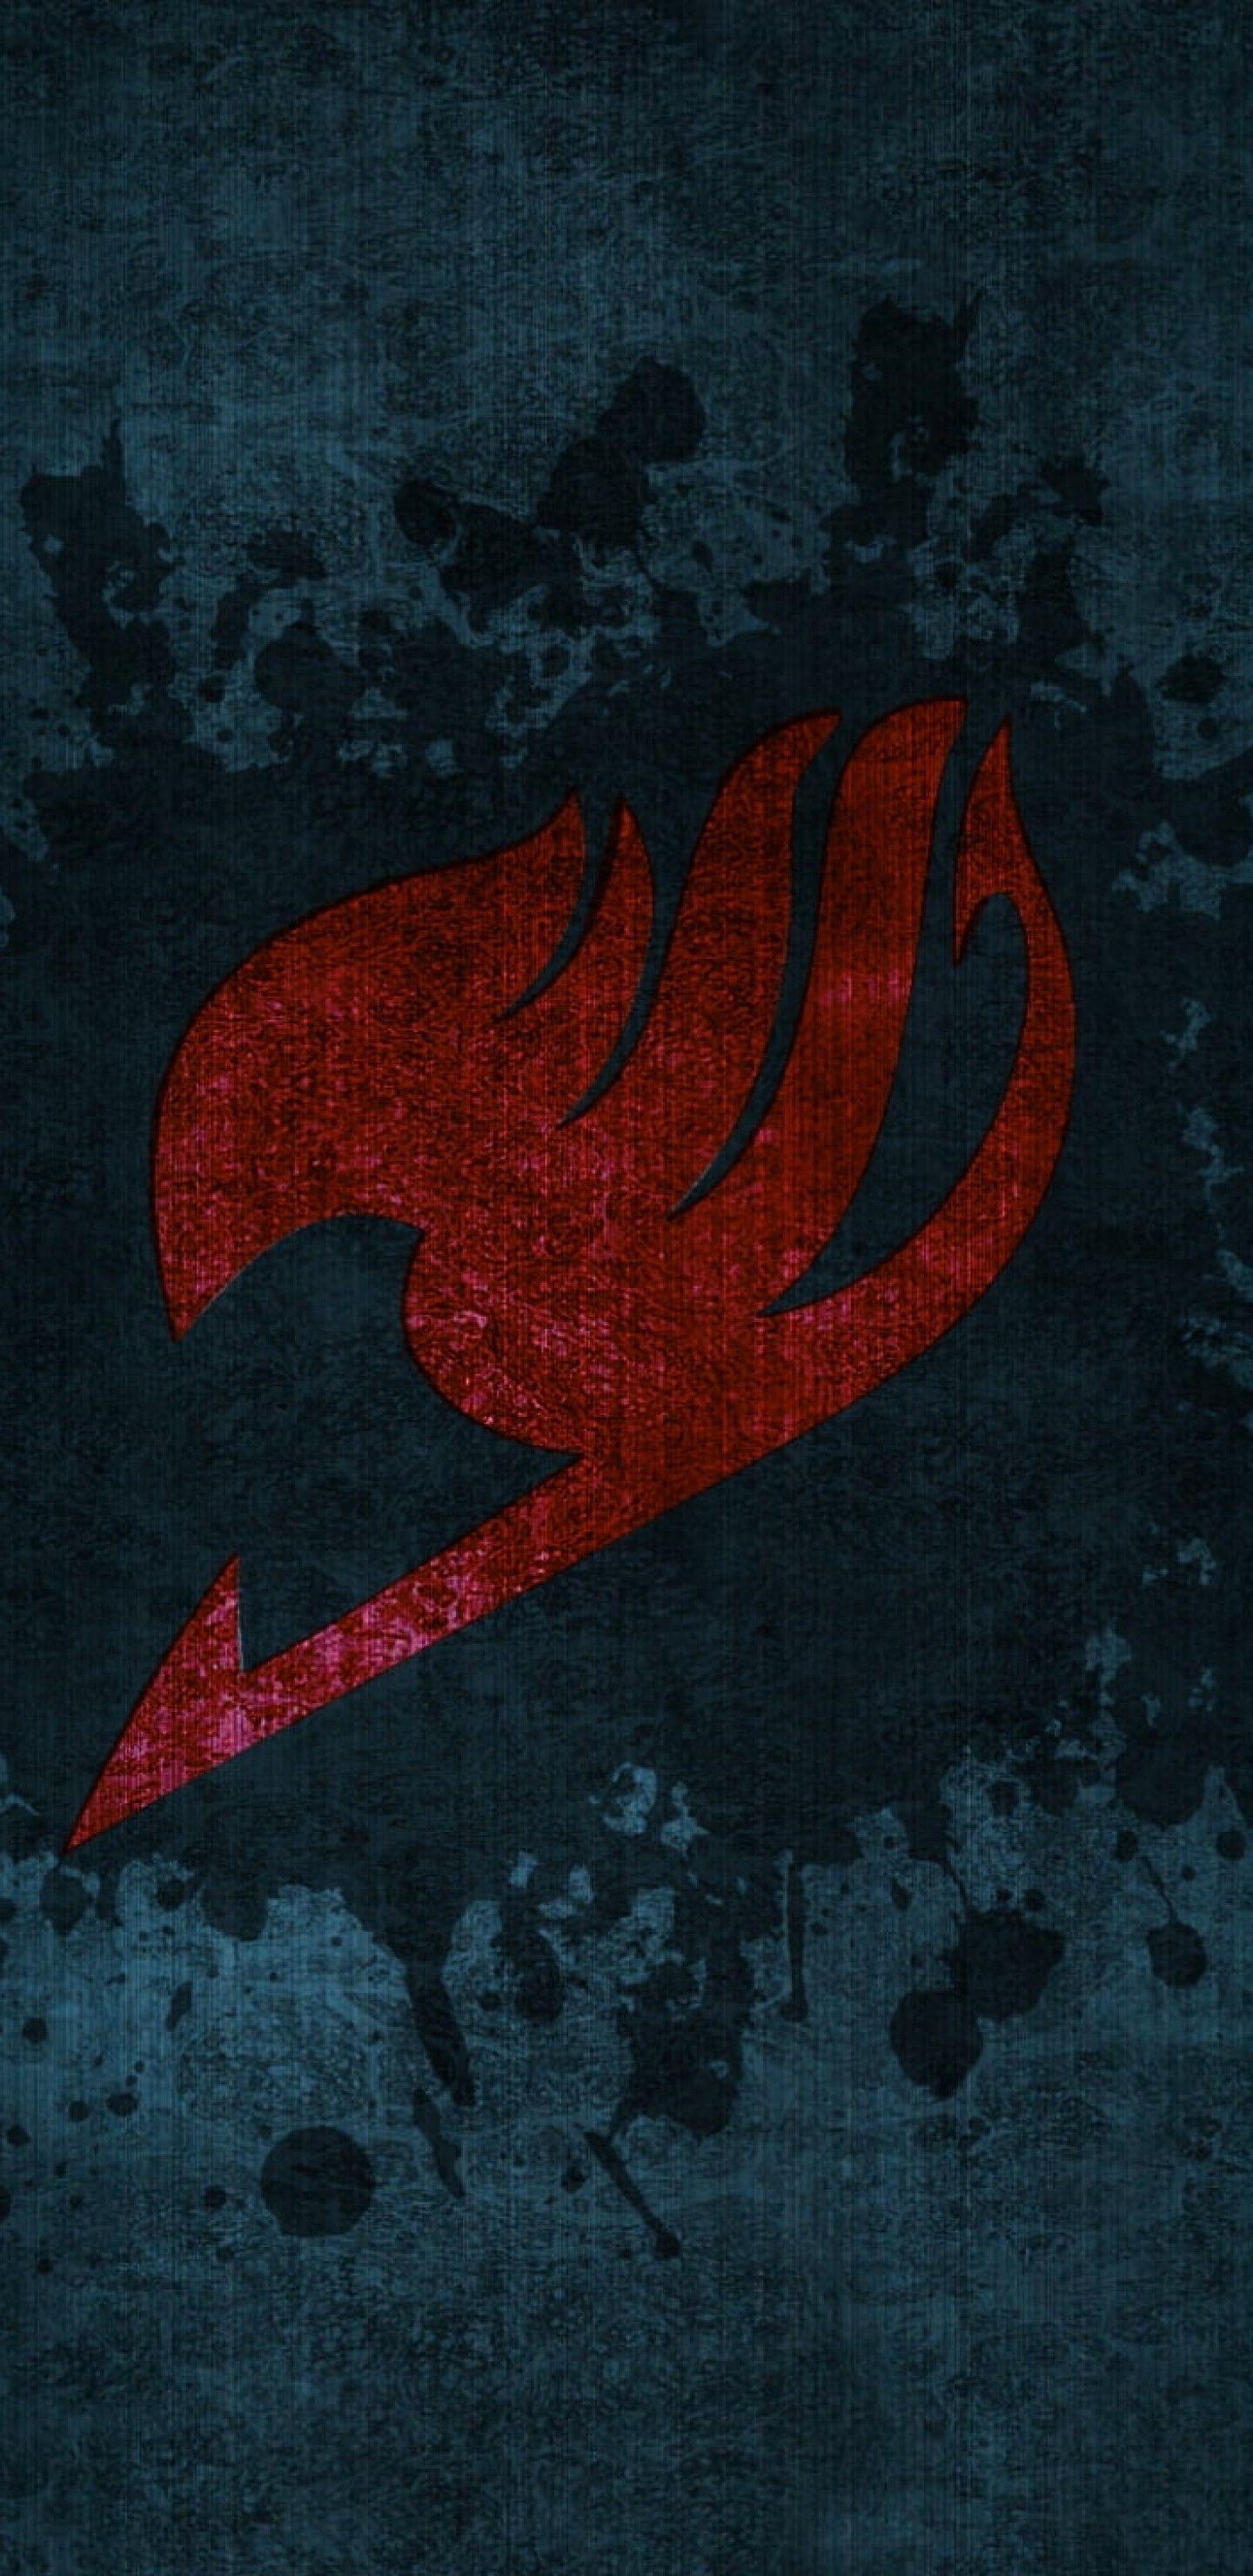 Fairy Tail Logo Iphone Wallpapers Top Free Fairy Tail Logo Iphone